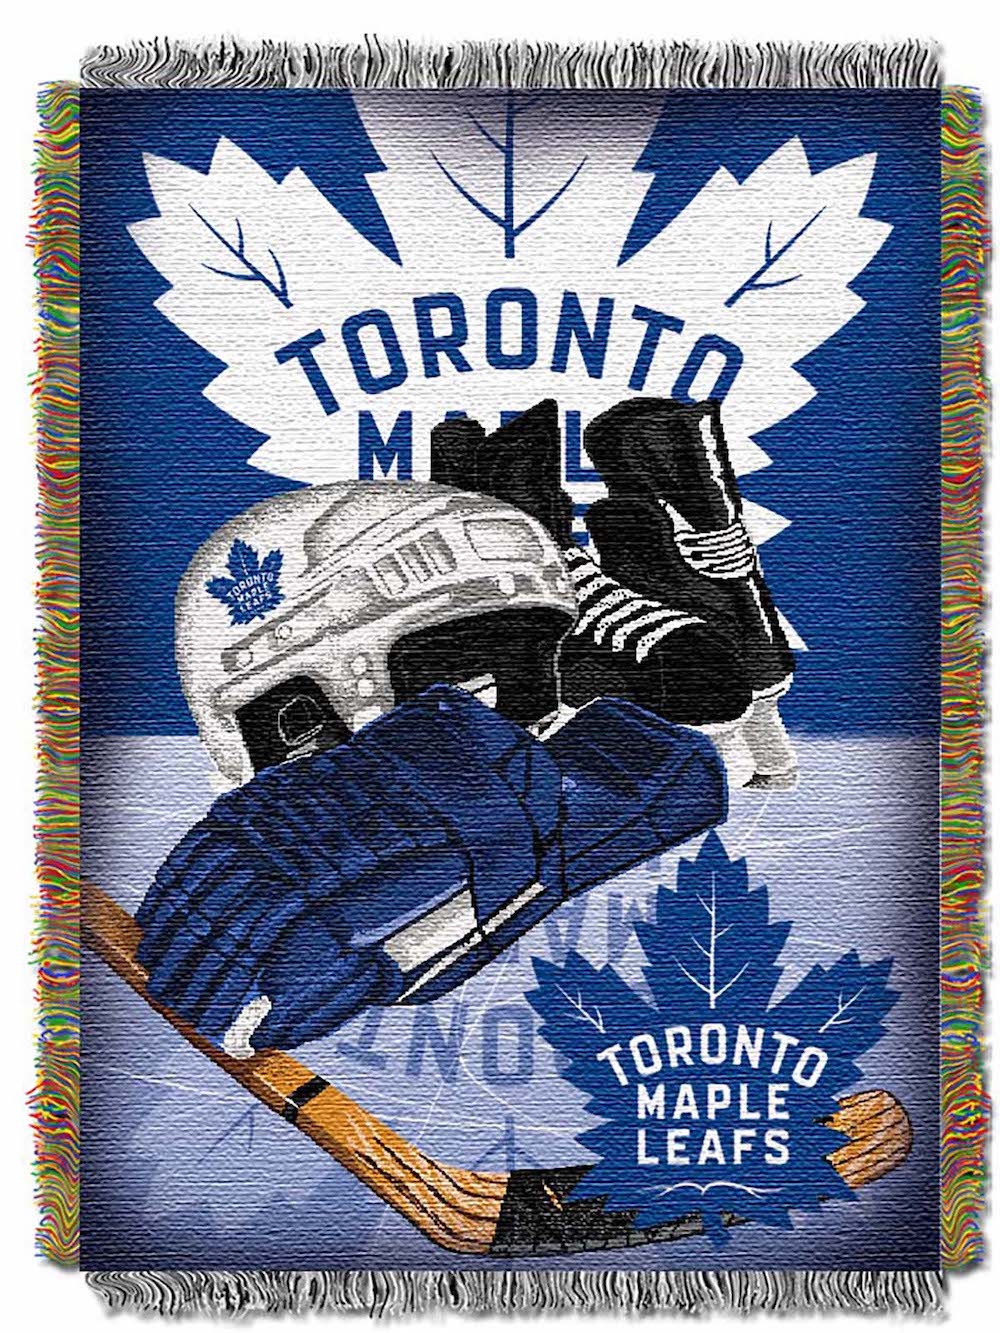 Toronto Maple Leafs woven home ice tapestry